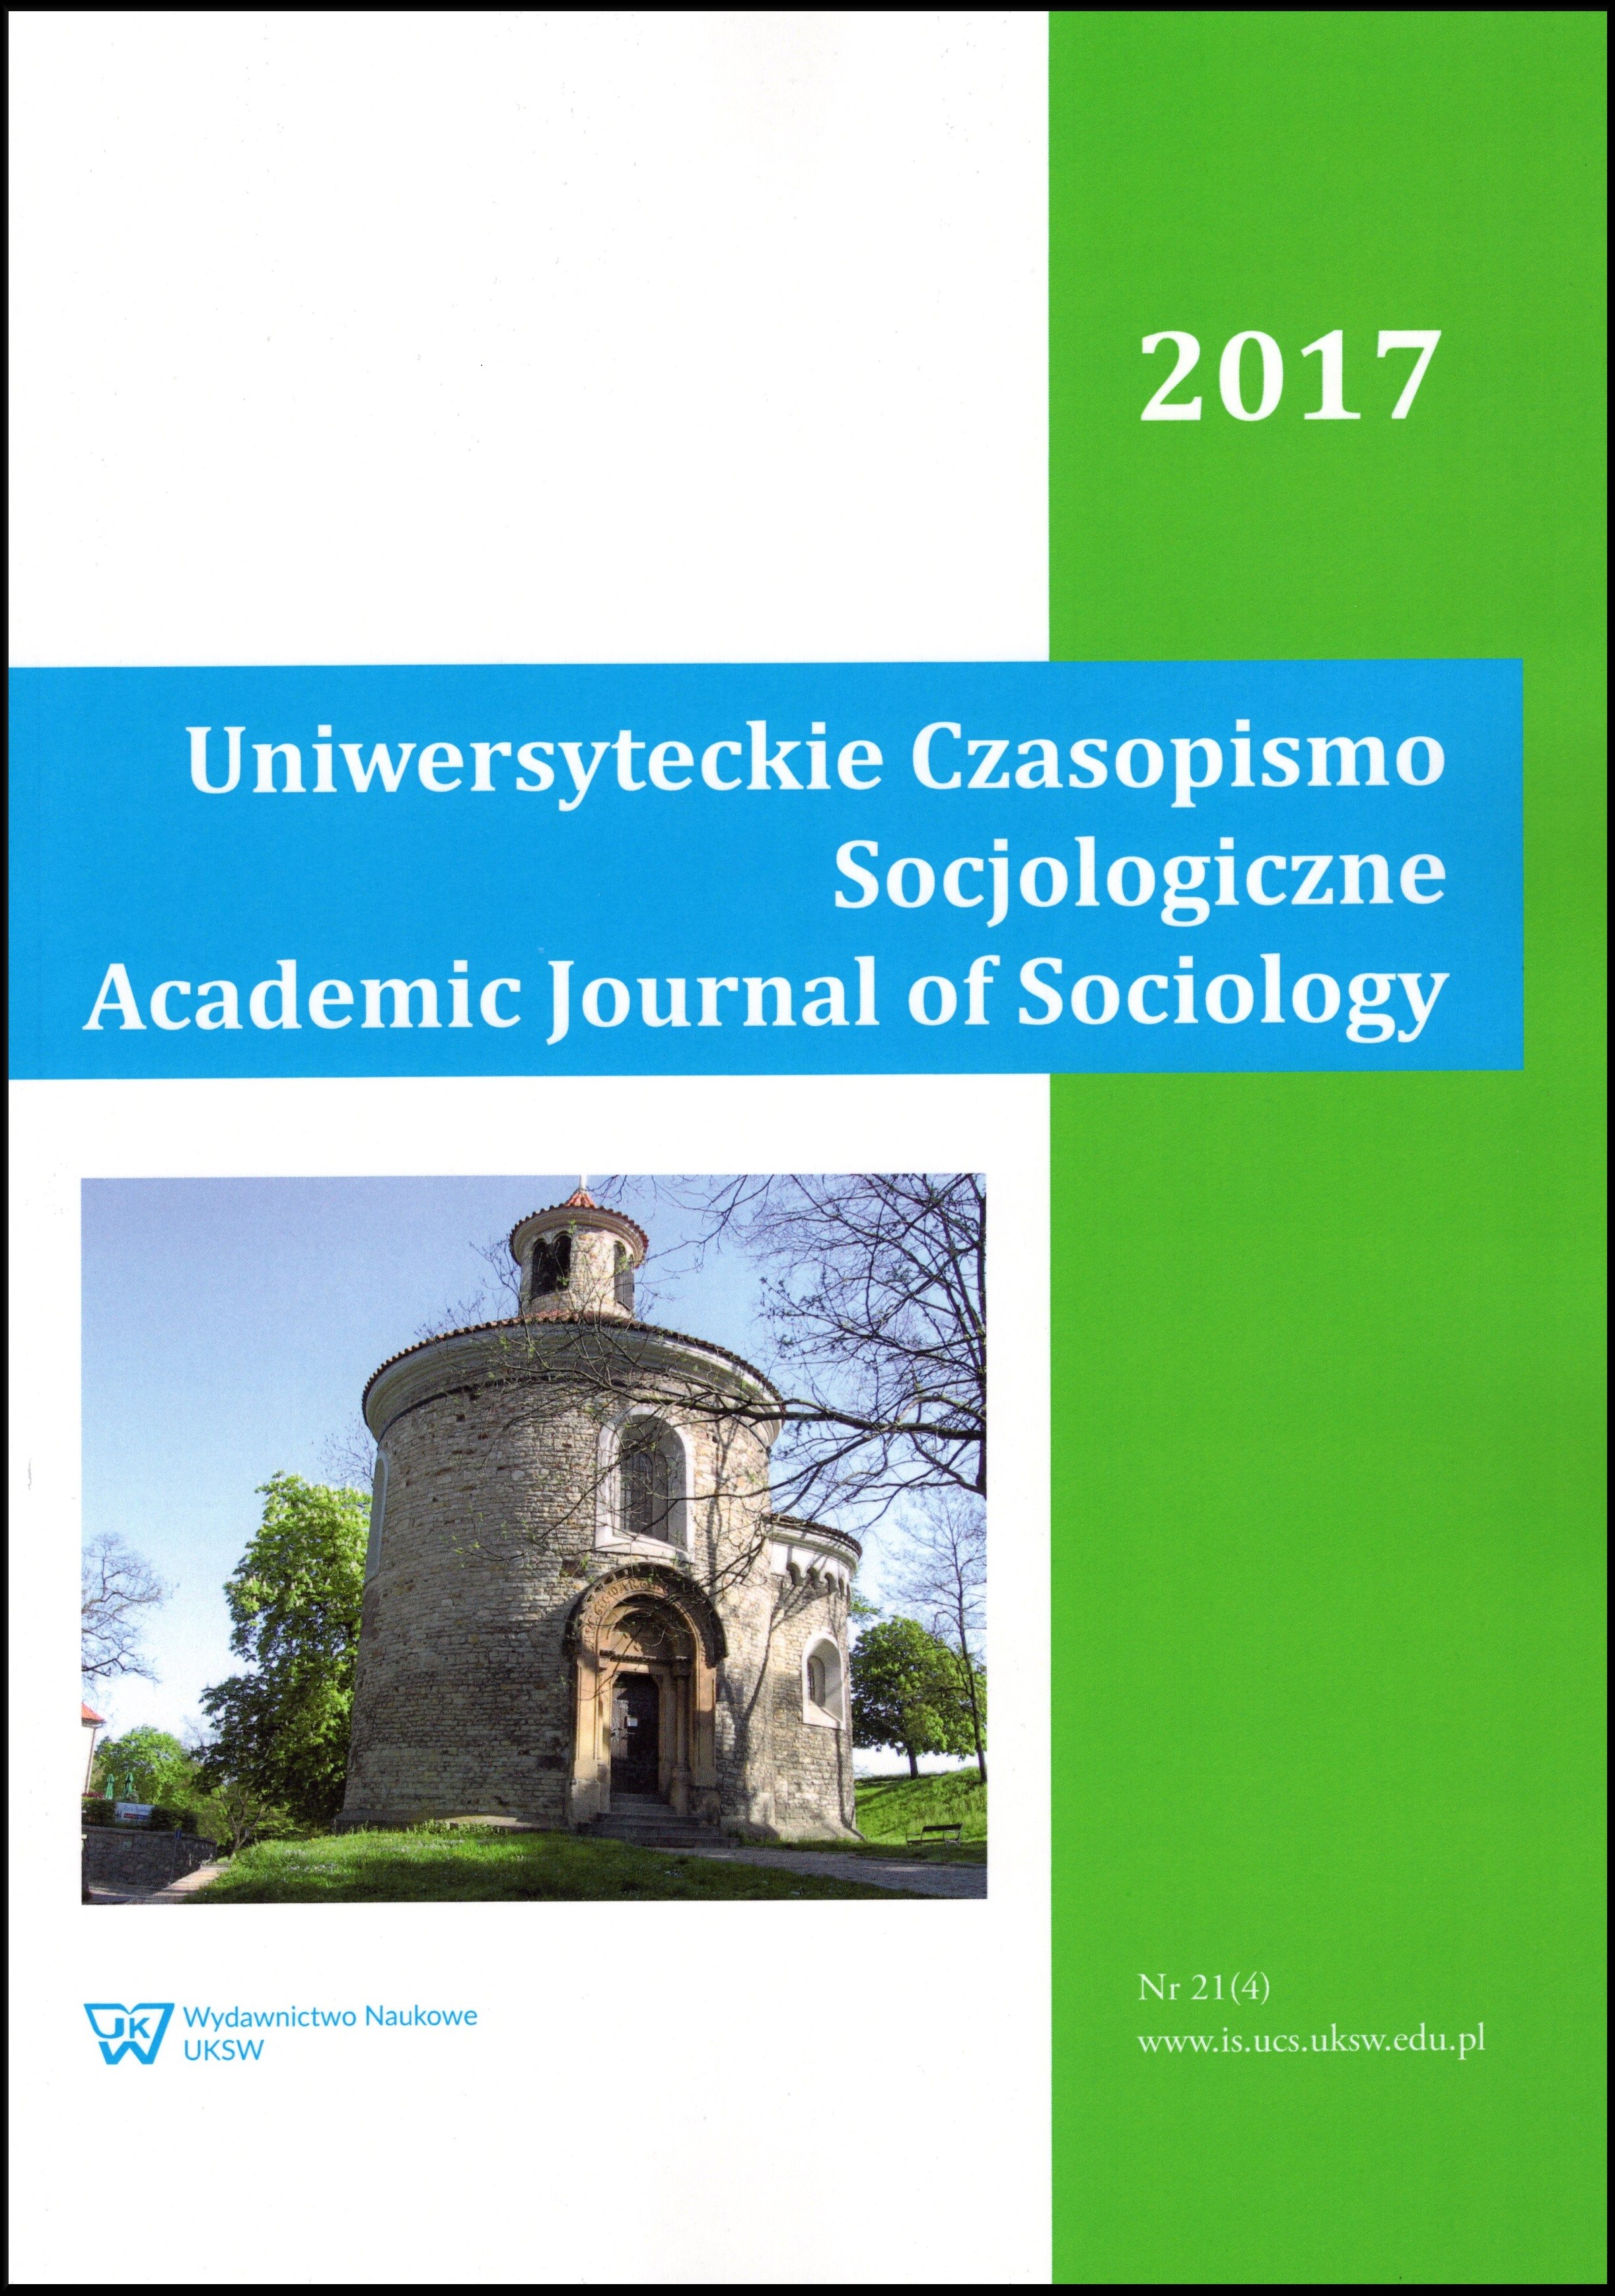 Janusz Mariański, "The Catholic Church in Poland in the social context. Sociological Study",  Wydawnictwo Naukowe PWN (Polish Scientific Publishers PWN), Warsaw 2018, pp. 281. Cover Image